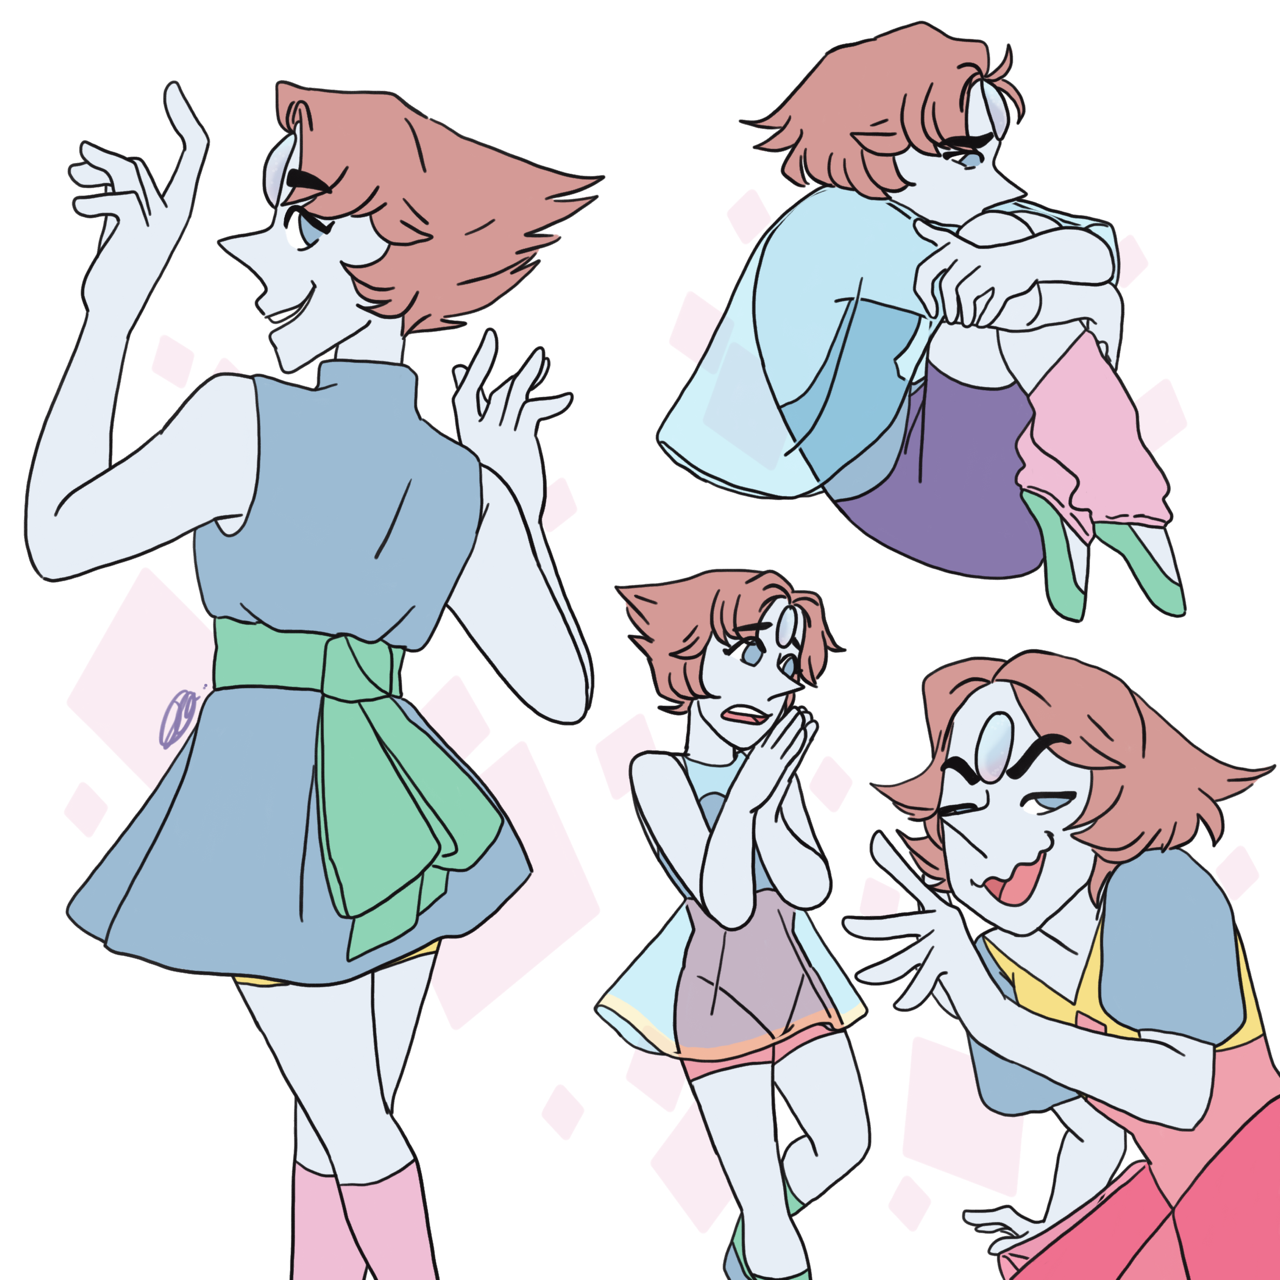 A compilation of Pearls because I love all of her designs